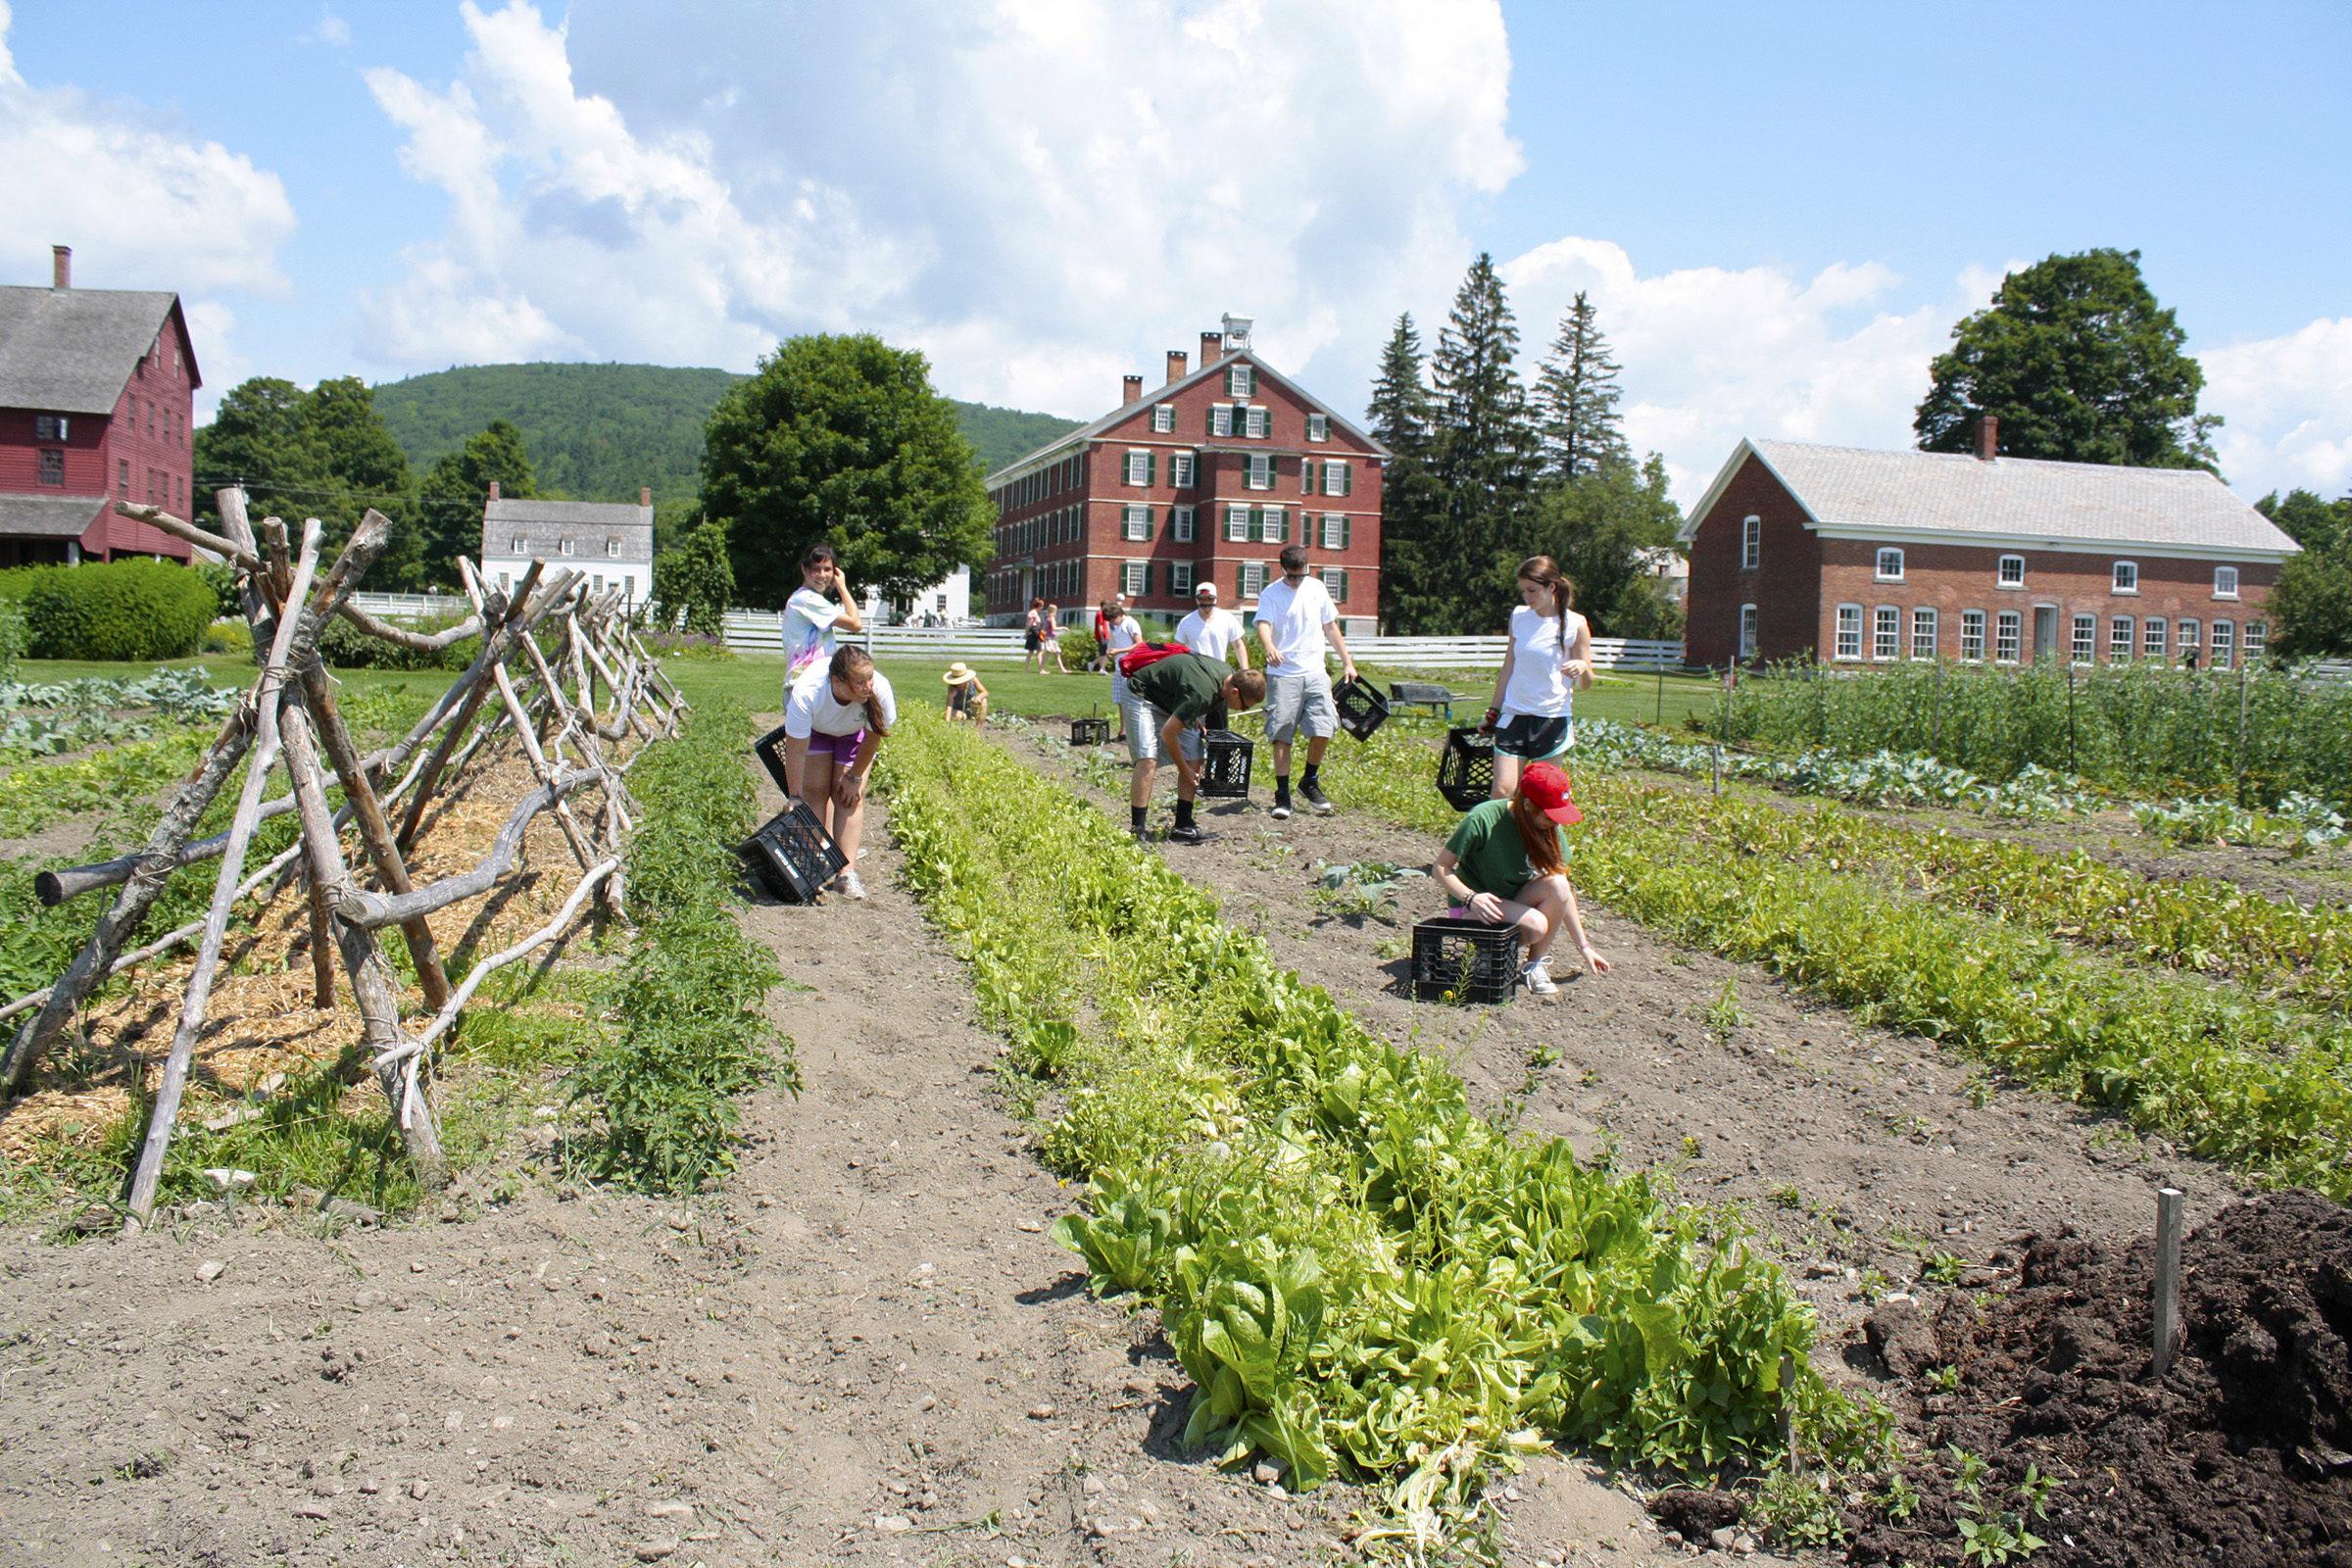 Photo of Hancock Shaker Mill vegetable gardens: The gardens at Hancock Shaker Village are a key educational component of the annual activities on site. Now, visitors can eat their education, both at Seeds cafe and through food awareness workshops; submitted photo.